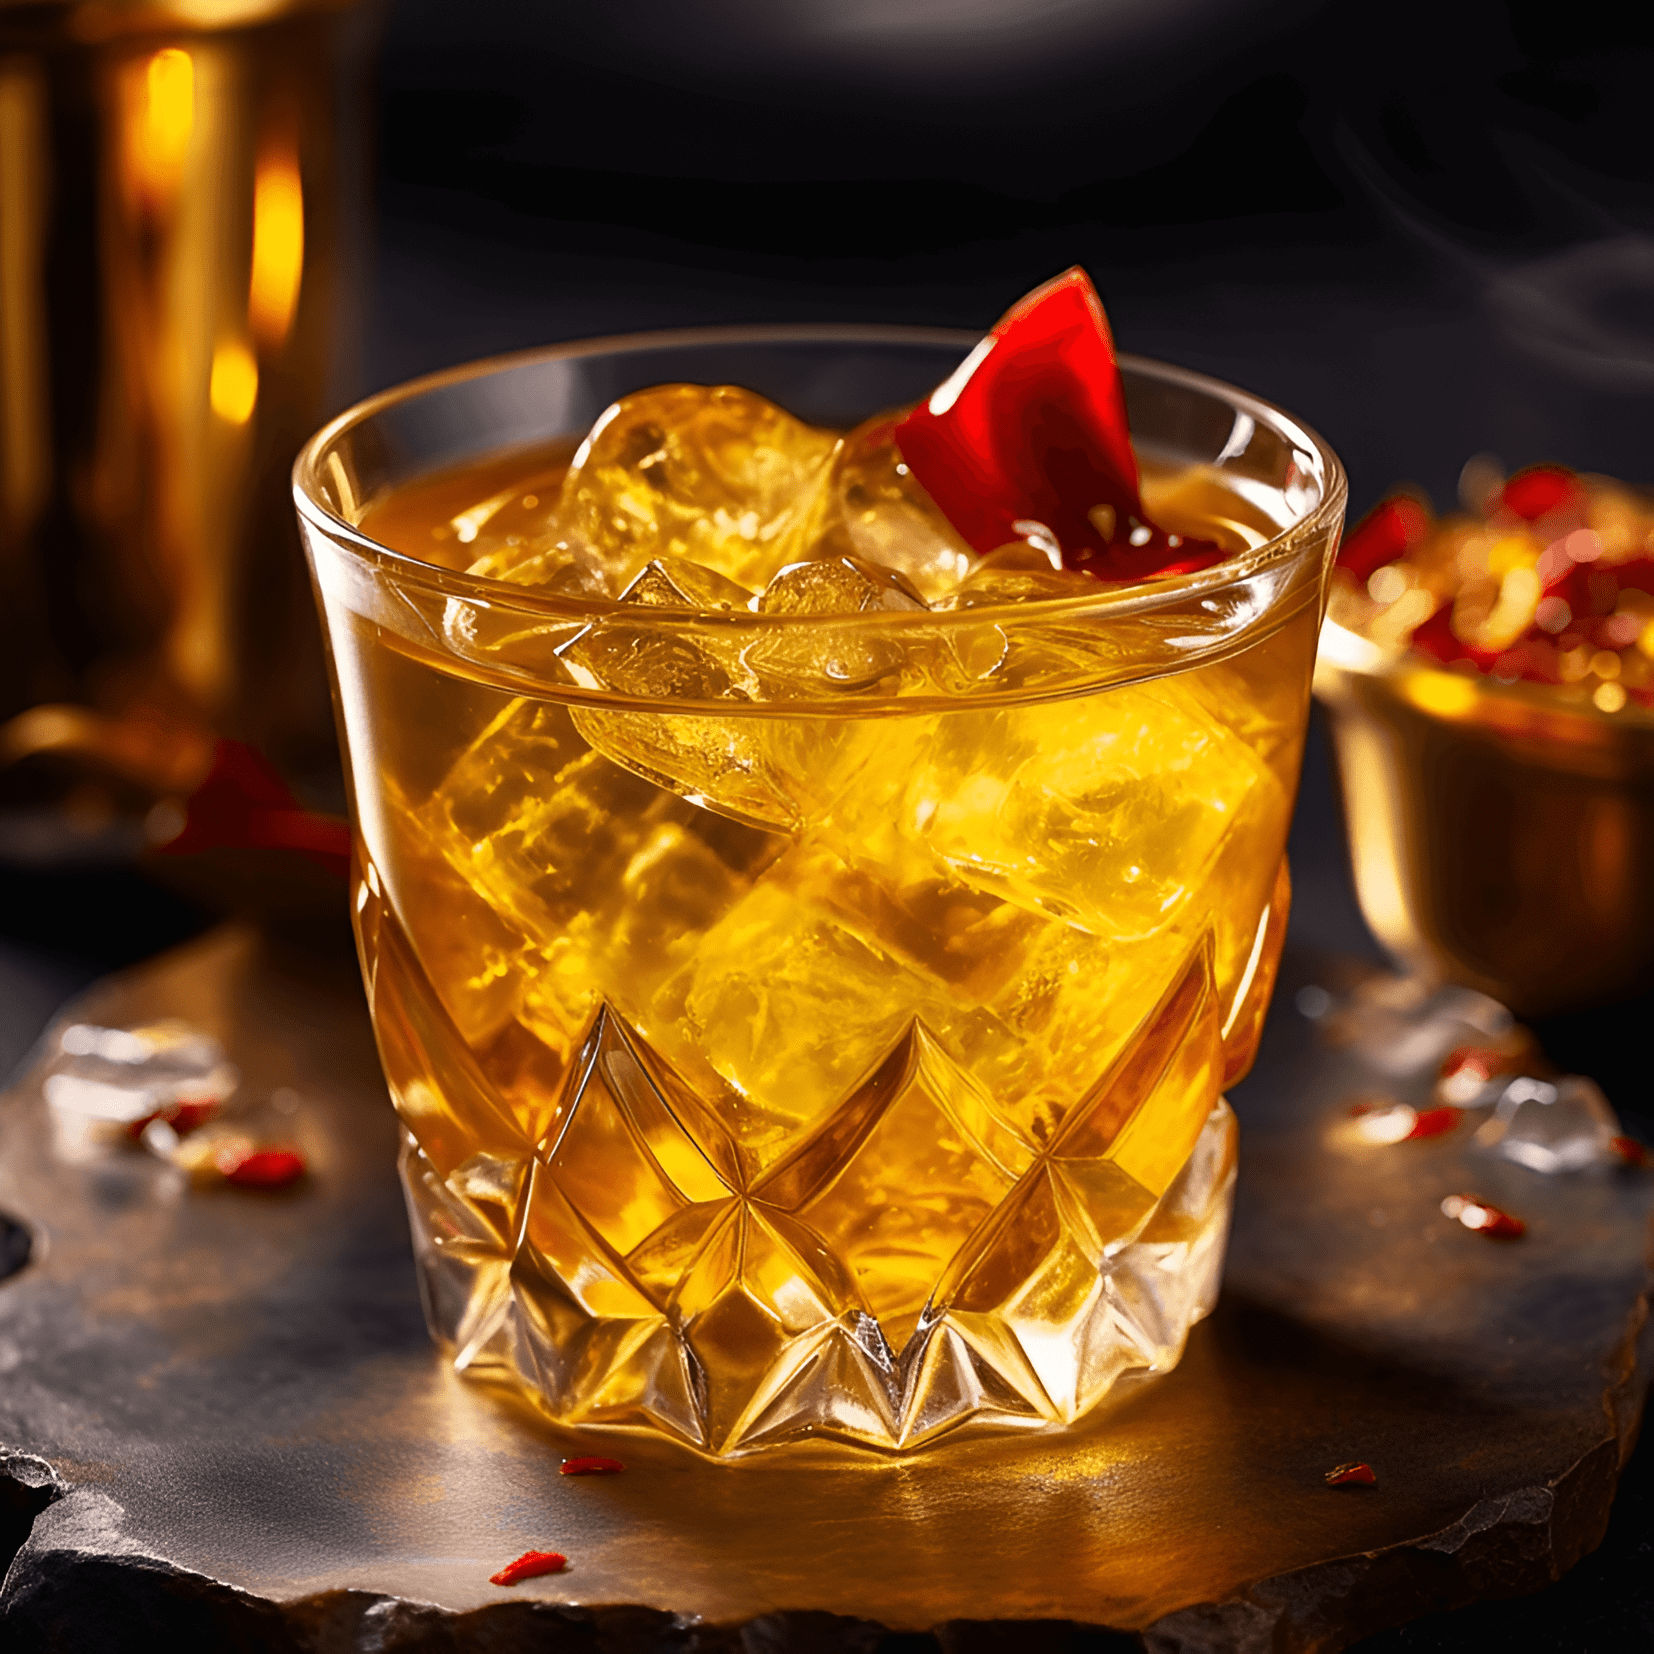 Aztec Gold Cocktail Recipe - The Aztec Gold cocktail is a harmonious blend of sweet, sour, and spicy flavors. The sweetness of the honey and the tartness of the lime juice are perfectly balanced by the warmth of the tequila and the heat of the chili pepper. The result is a bold, invigorating, and unforgettable taste experience.